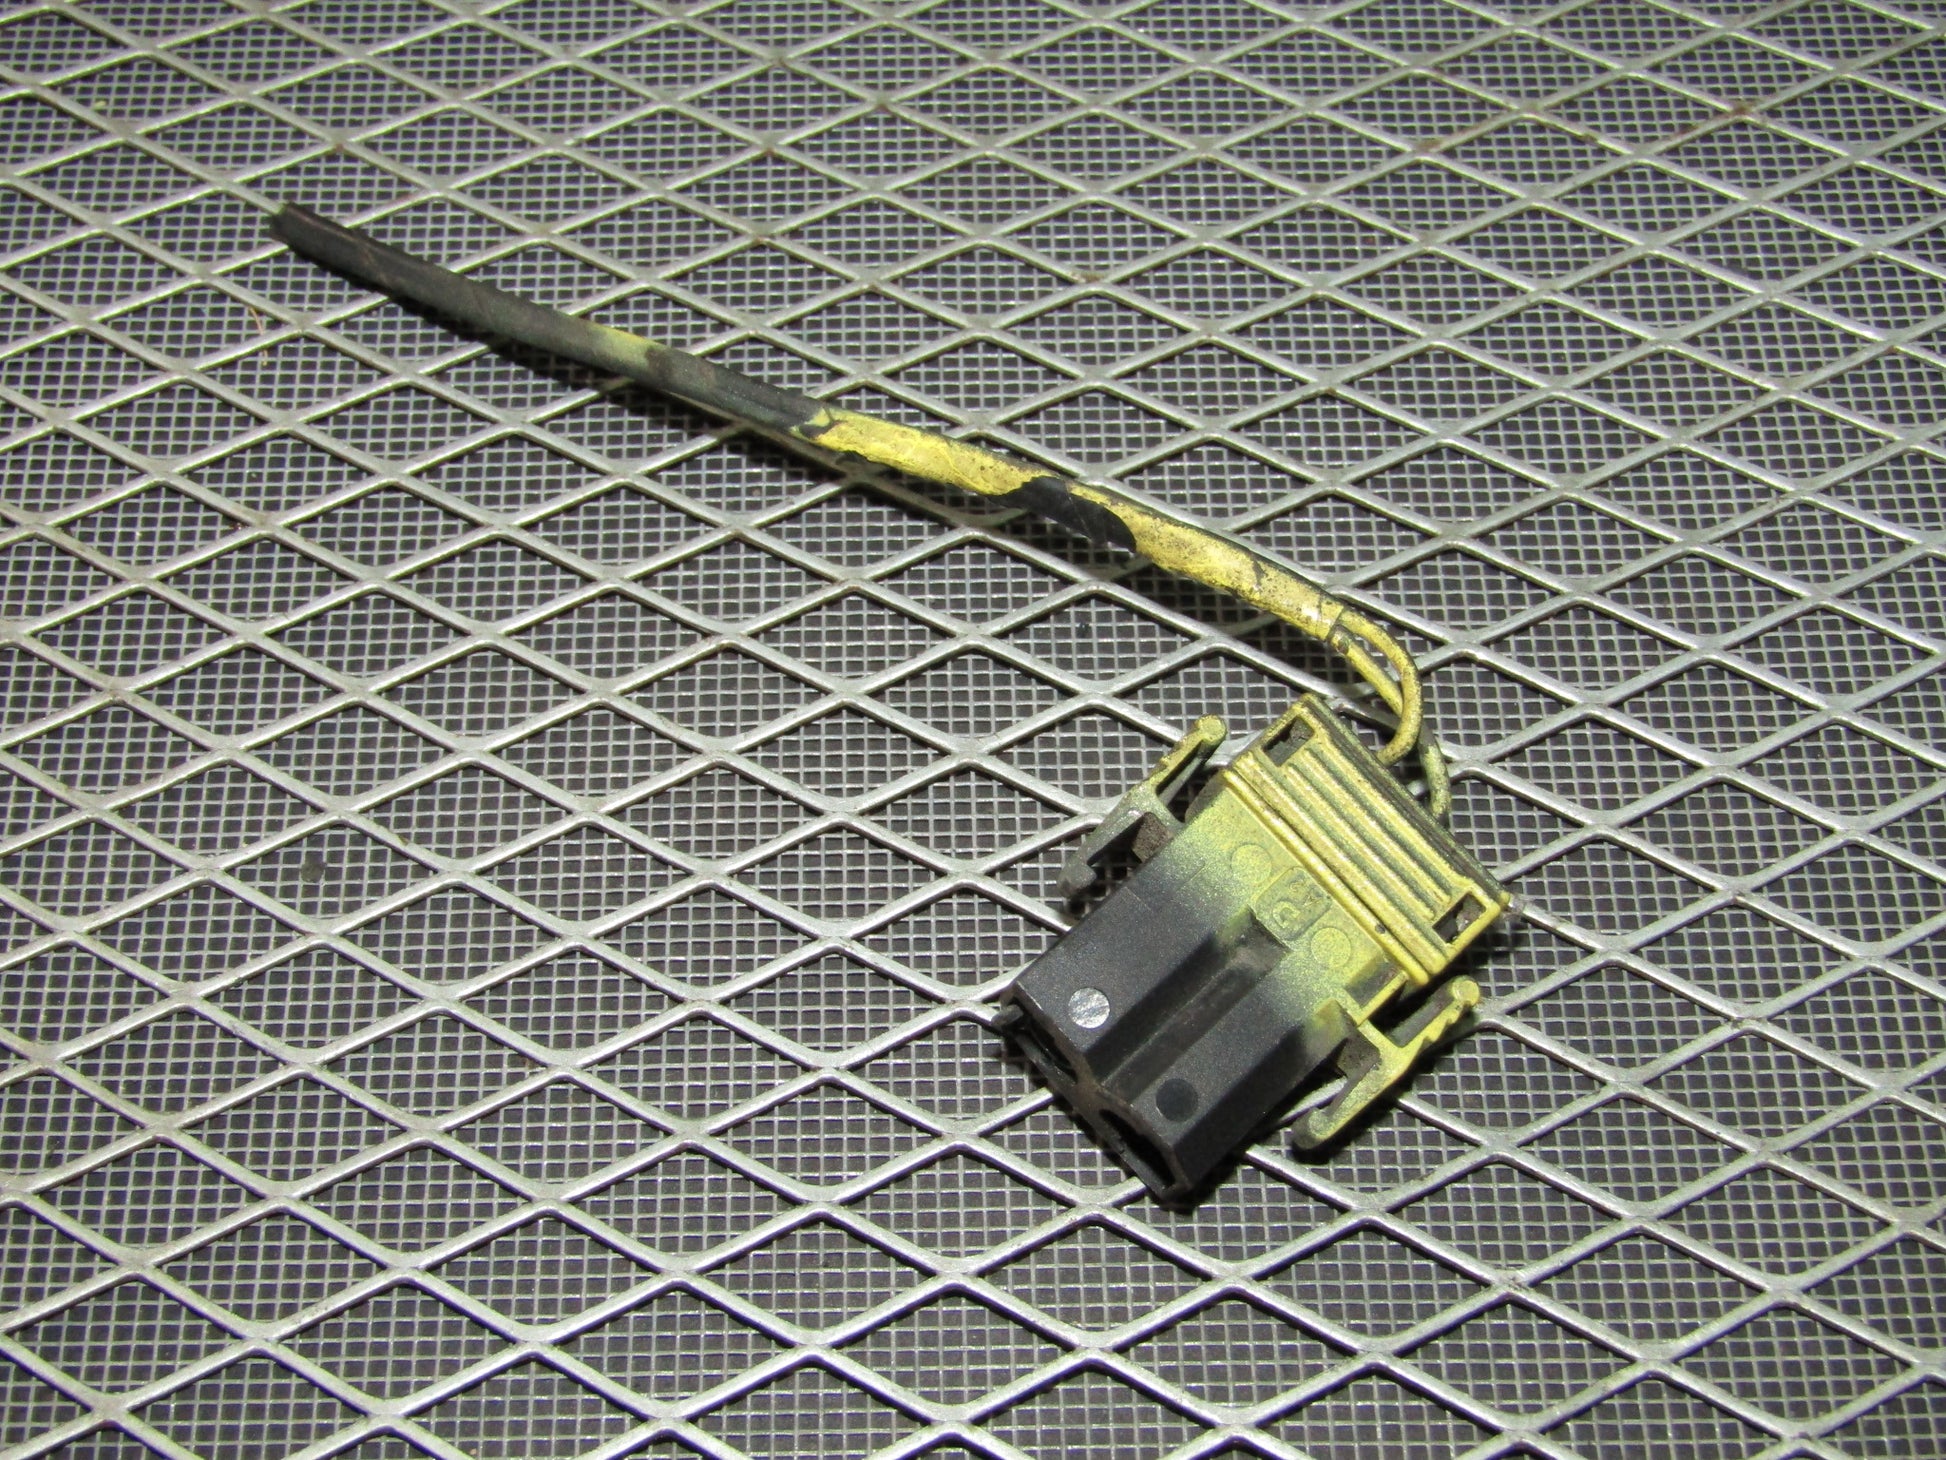 92 93 94 95 BMW 325 OEM Relay 8350549 37.94/06 Pigtail Harness